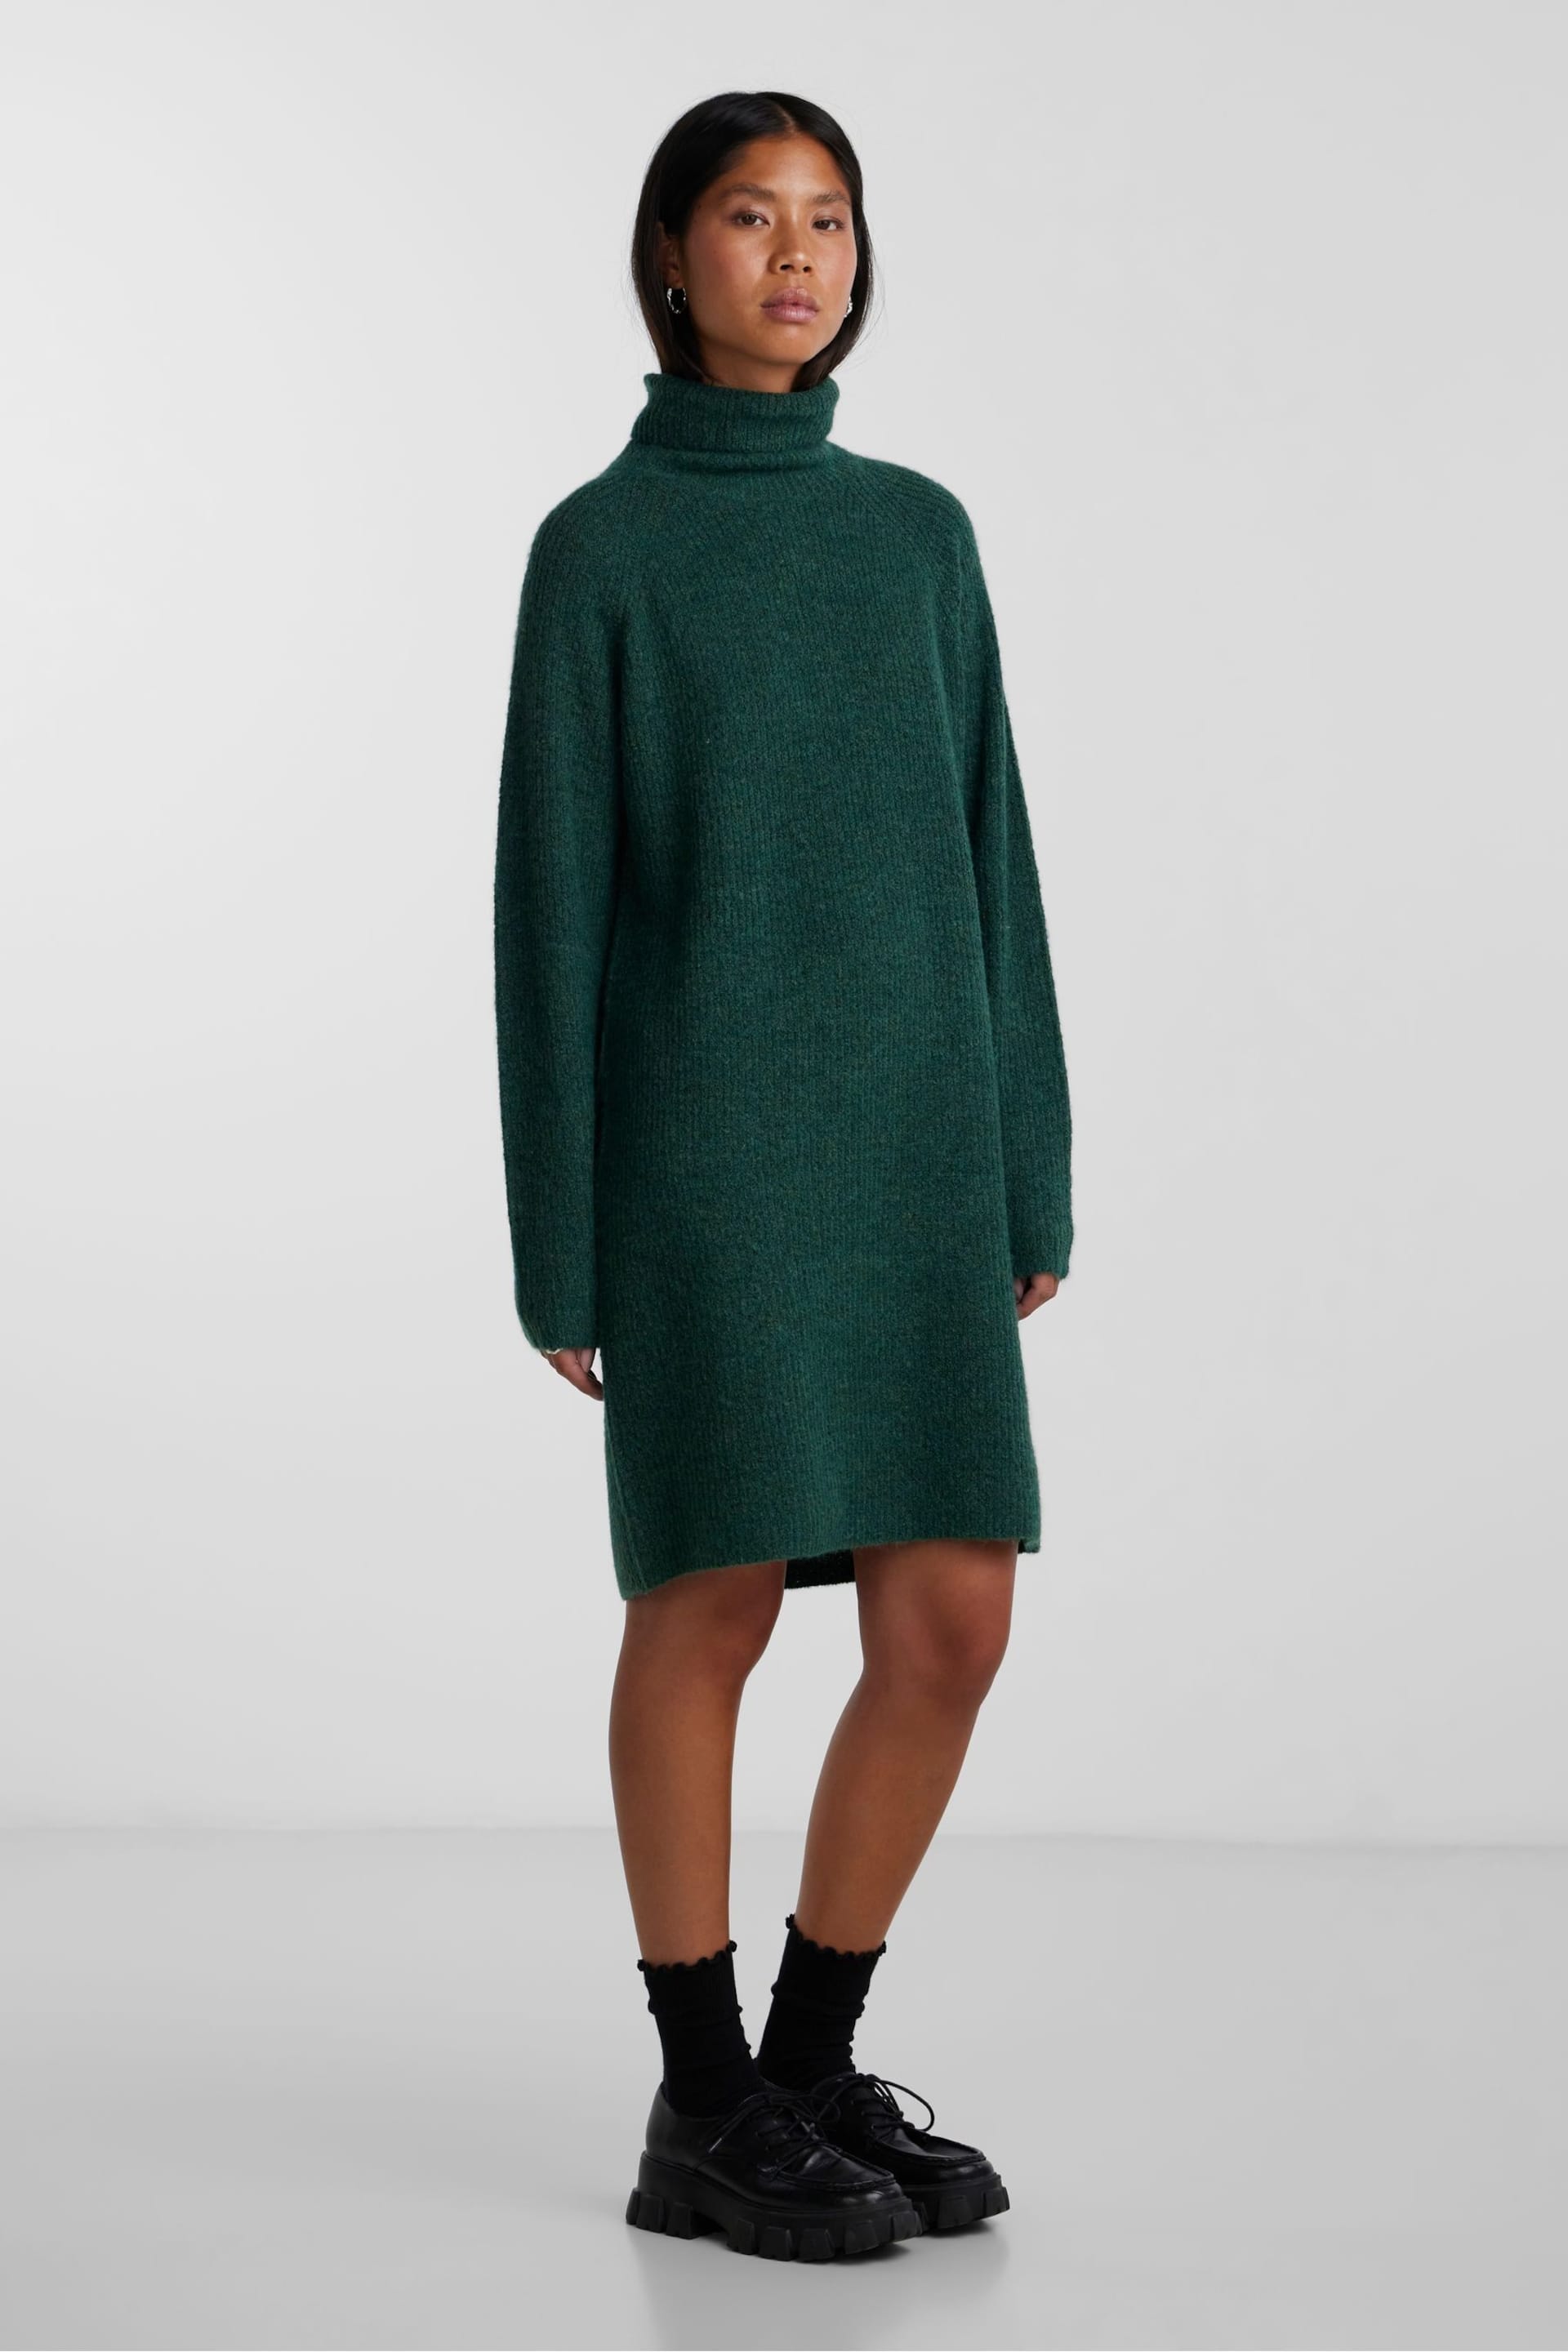 PIECES Green Roll Neck Knitted Jumper Dress - Image 3 of 5